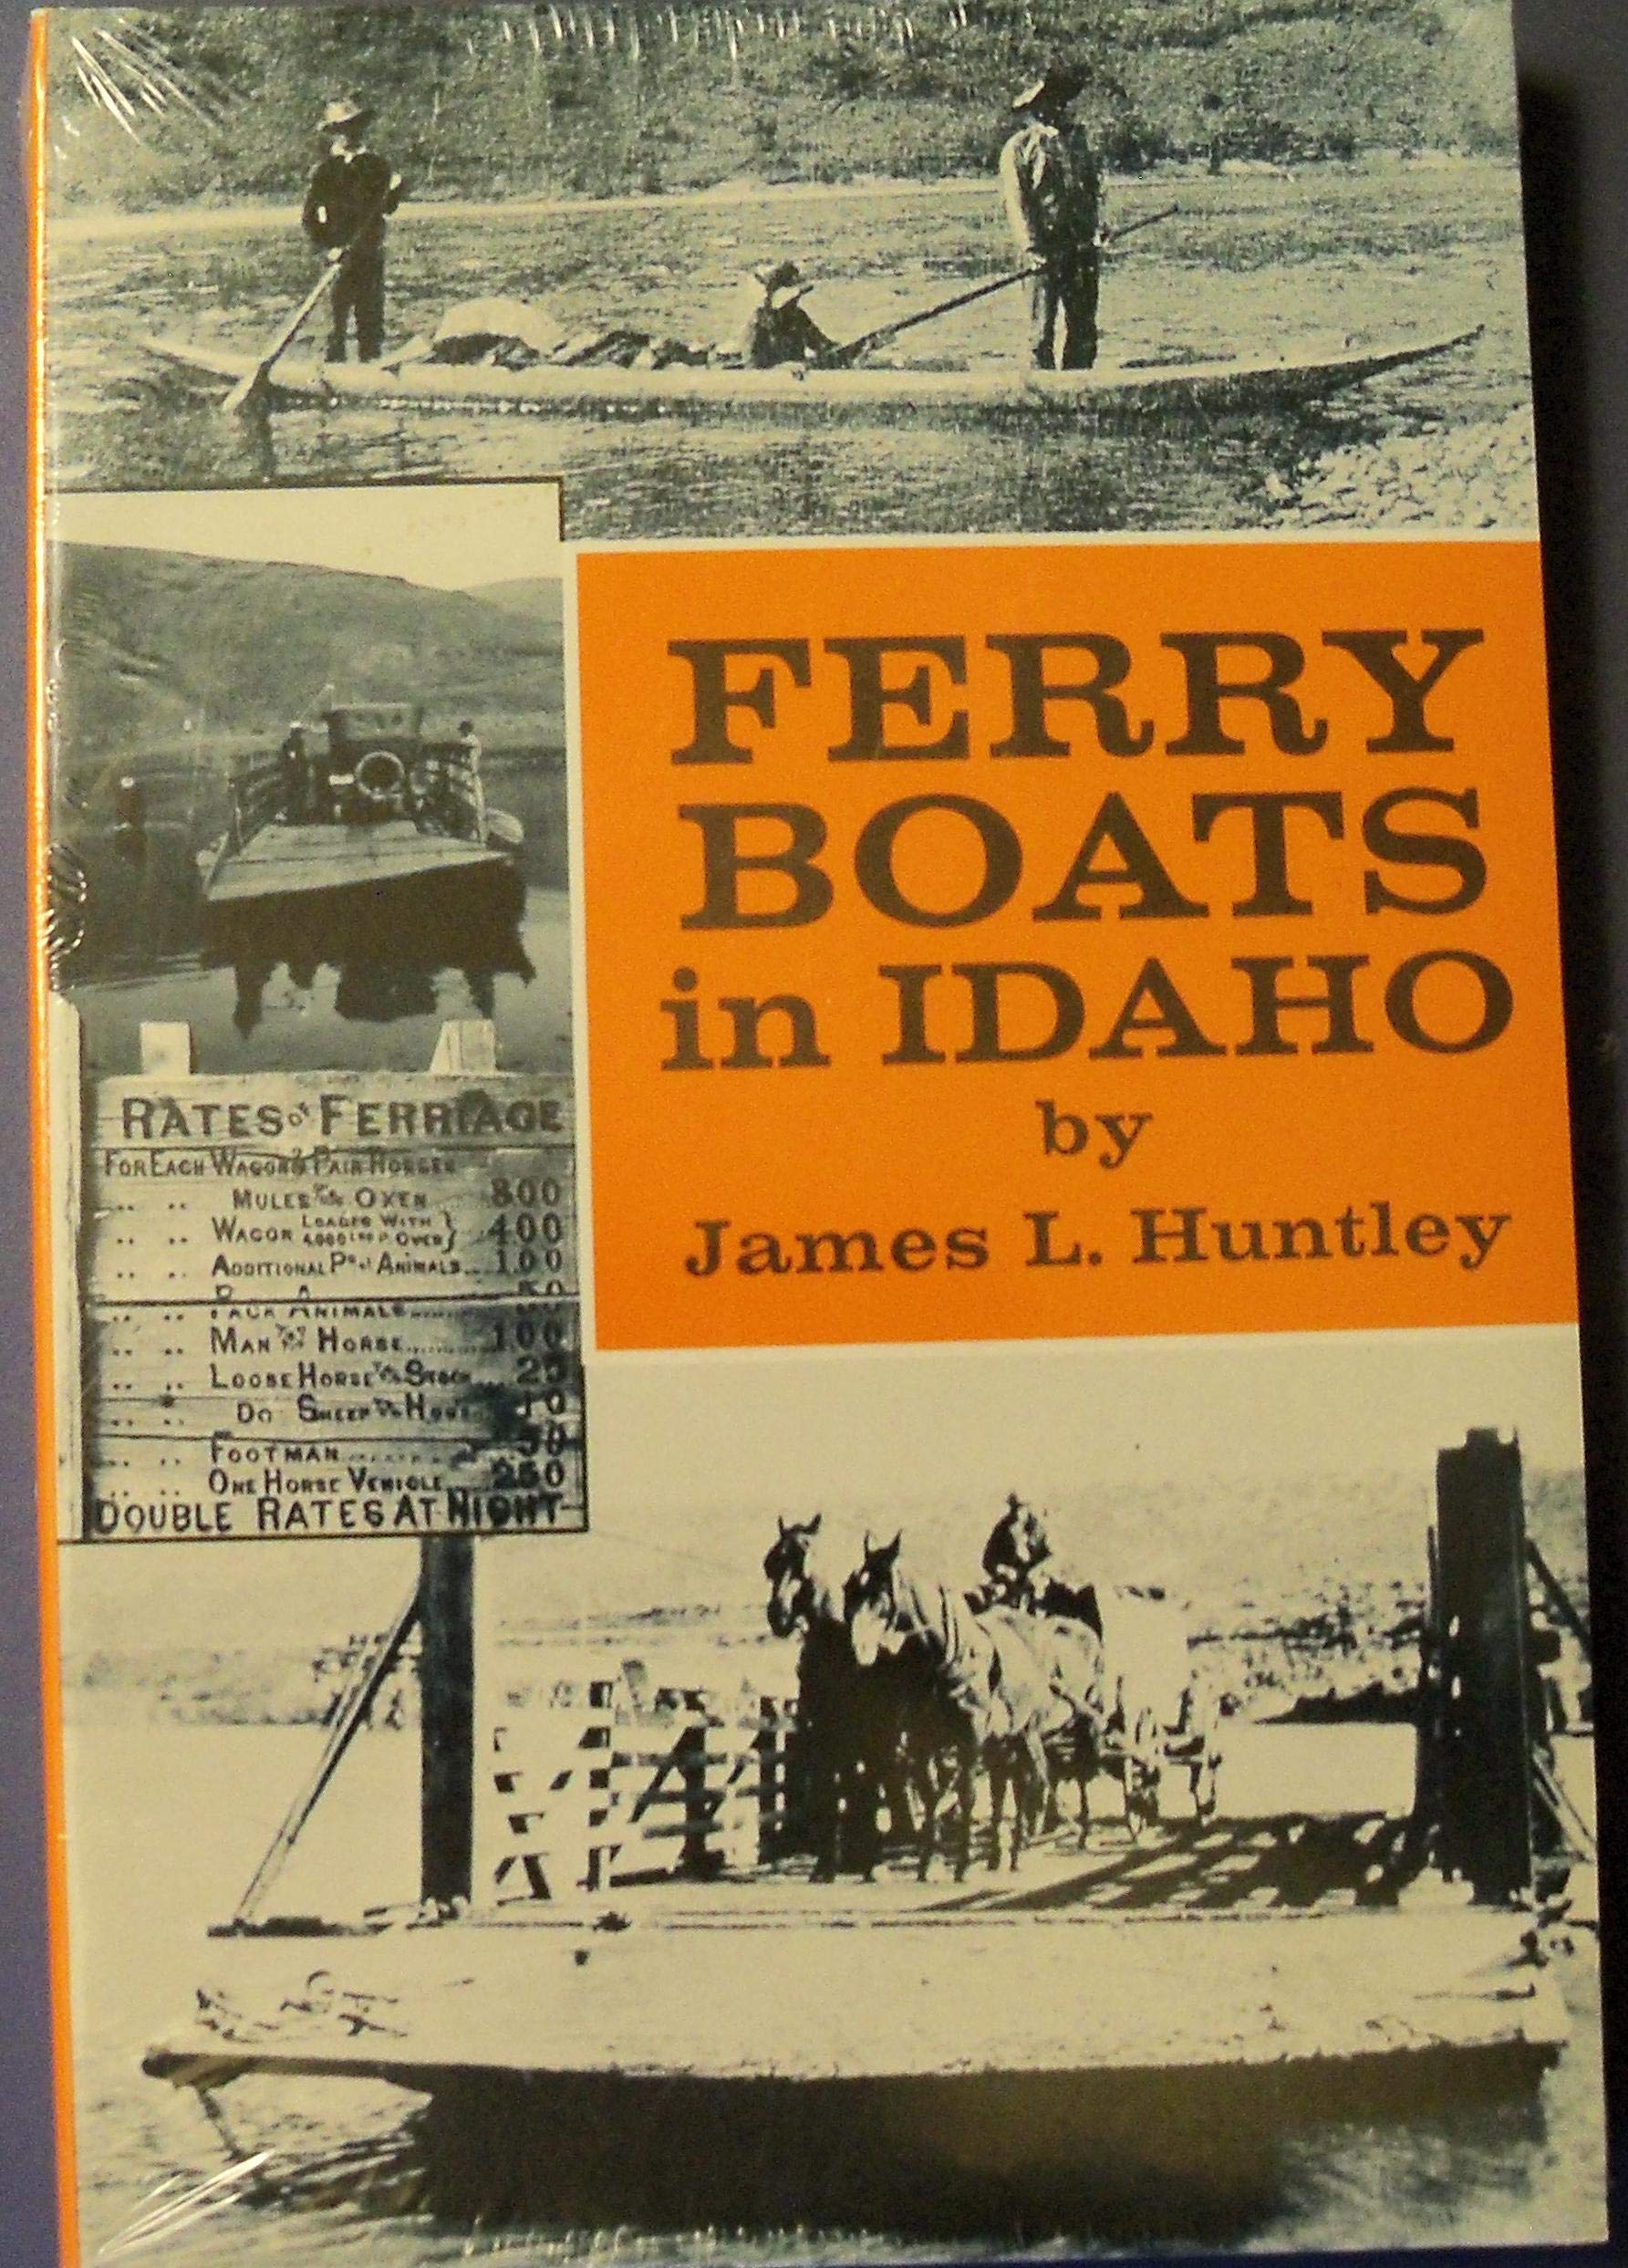 Ferryboats in Idaho (book cover)